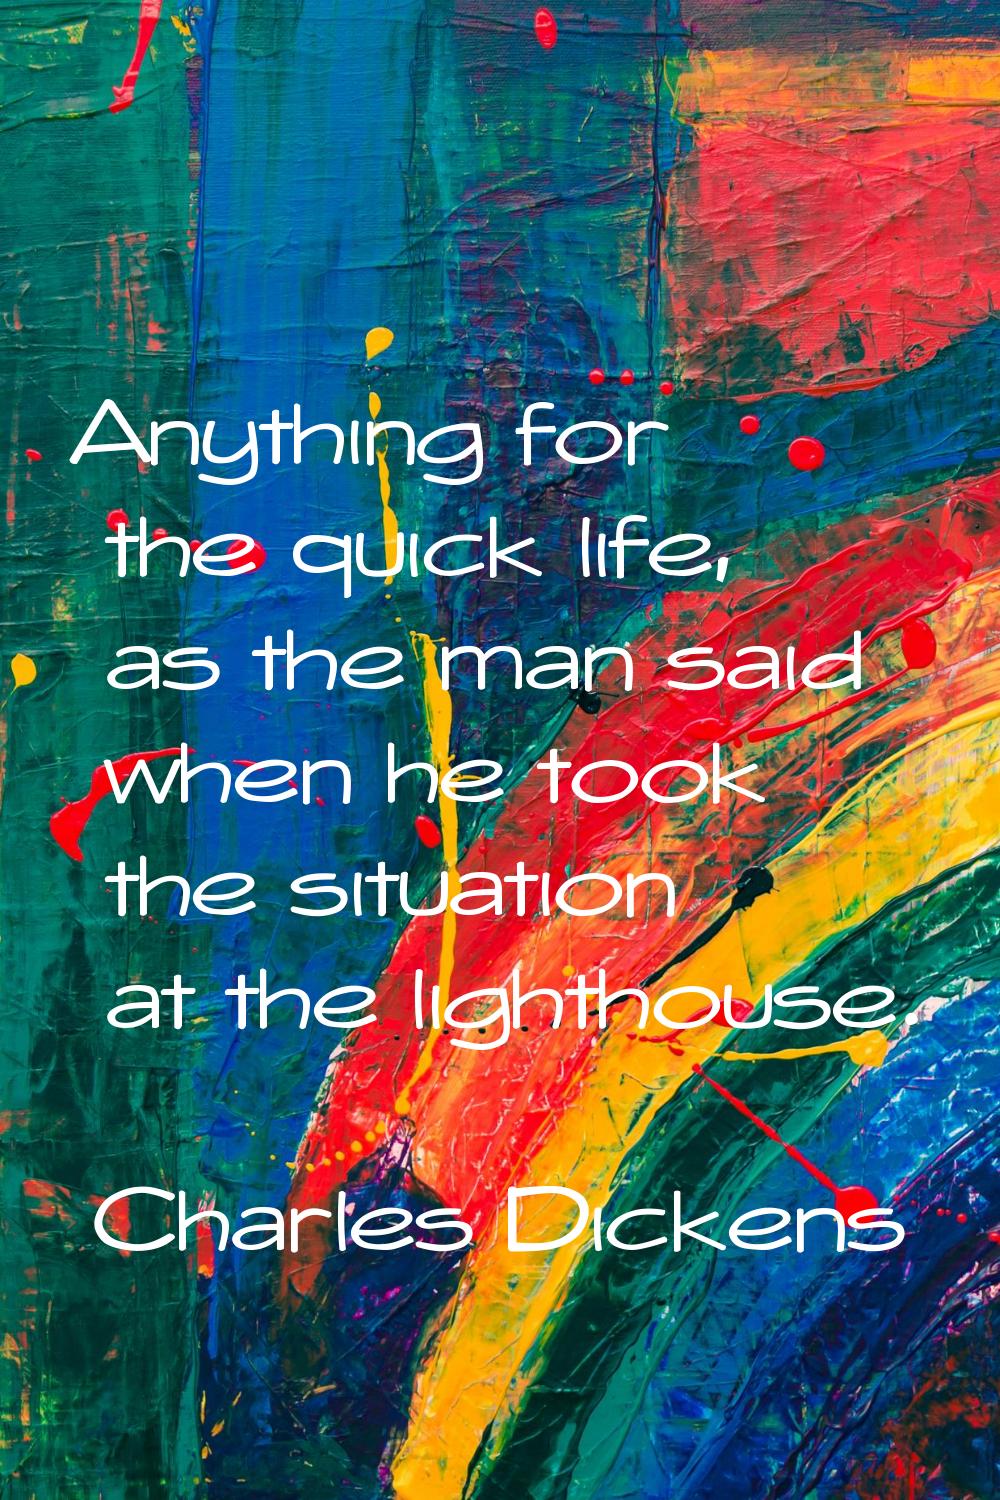 Anything for the quick life, as the man said when he took the situation at the lighthouse.